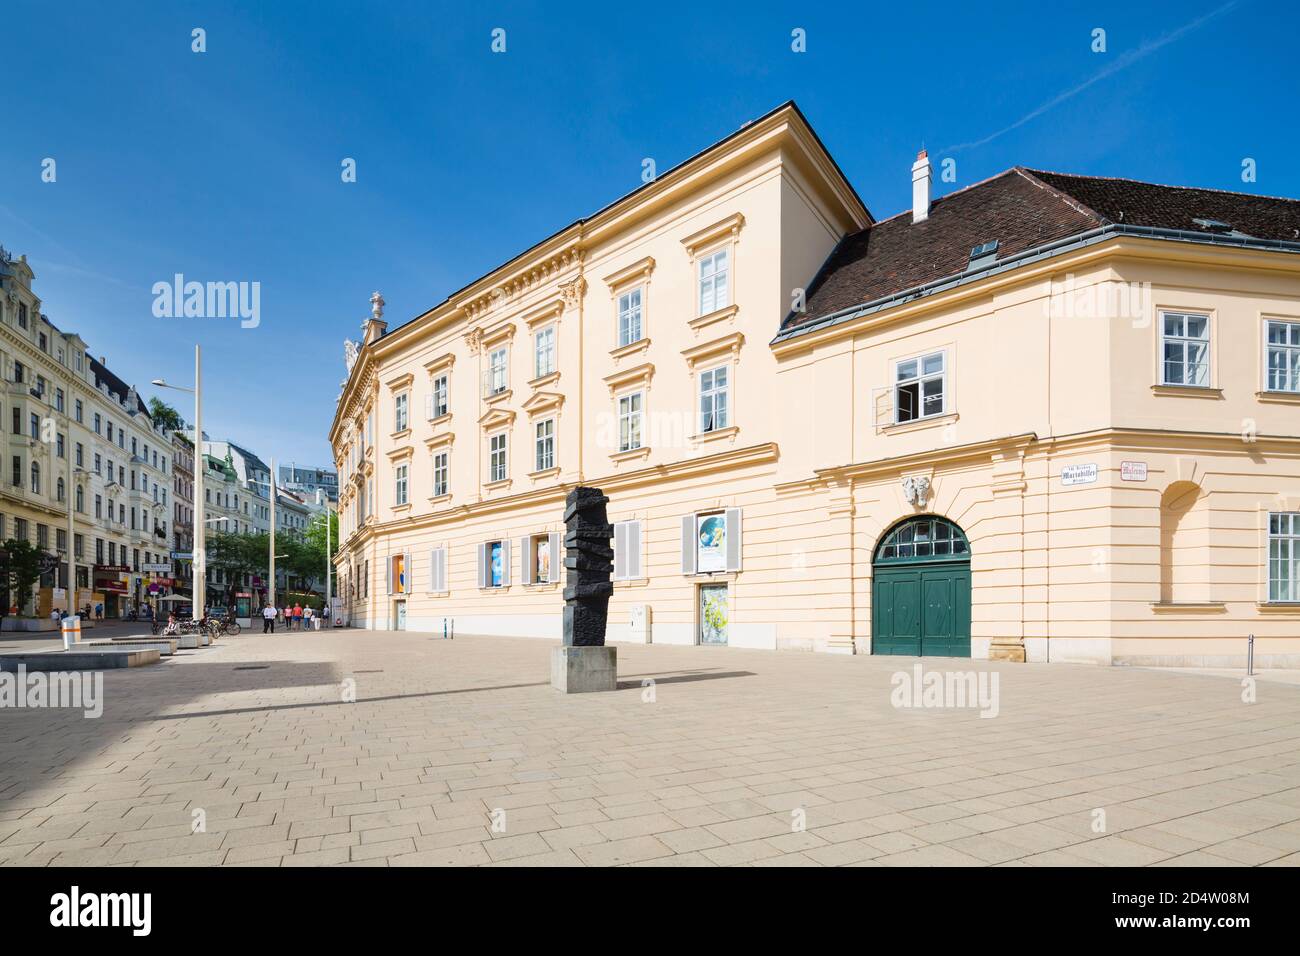 VIENNA - MAY 3: Dschungel theater building of the Museumsquartier MQ in Vienna, Austria with blue sky on May 3, 2018 Stock Photo